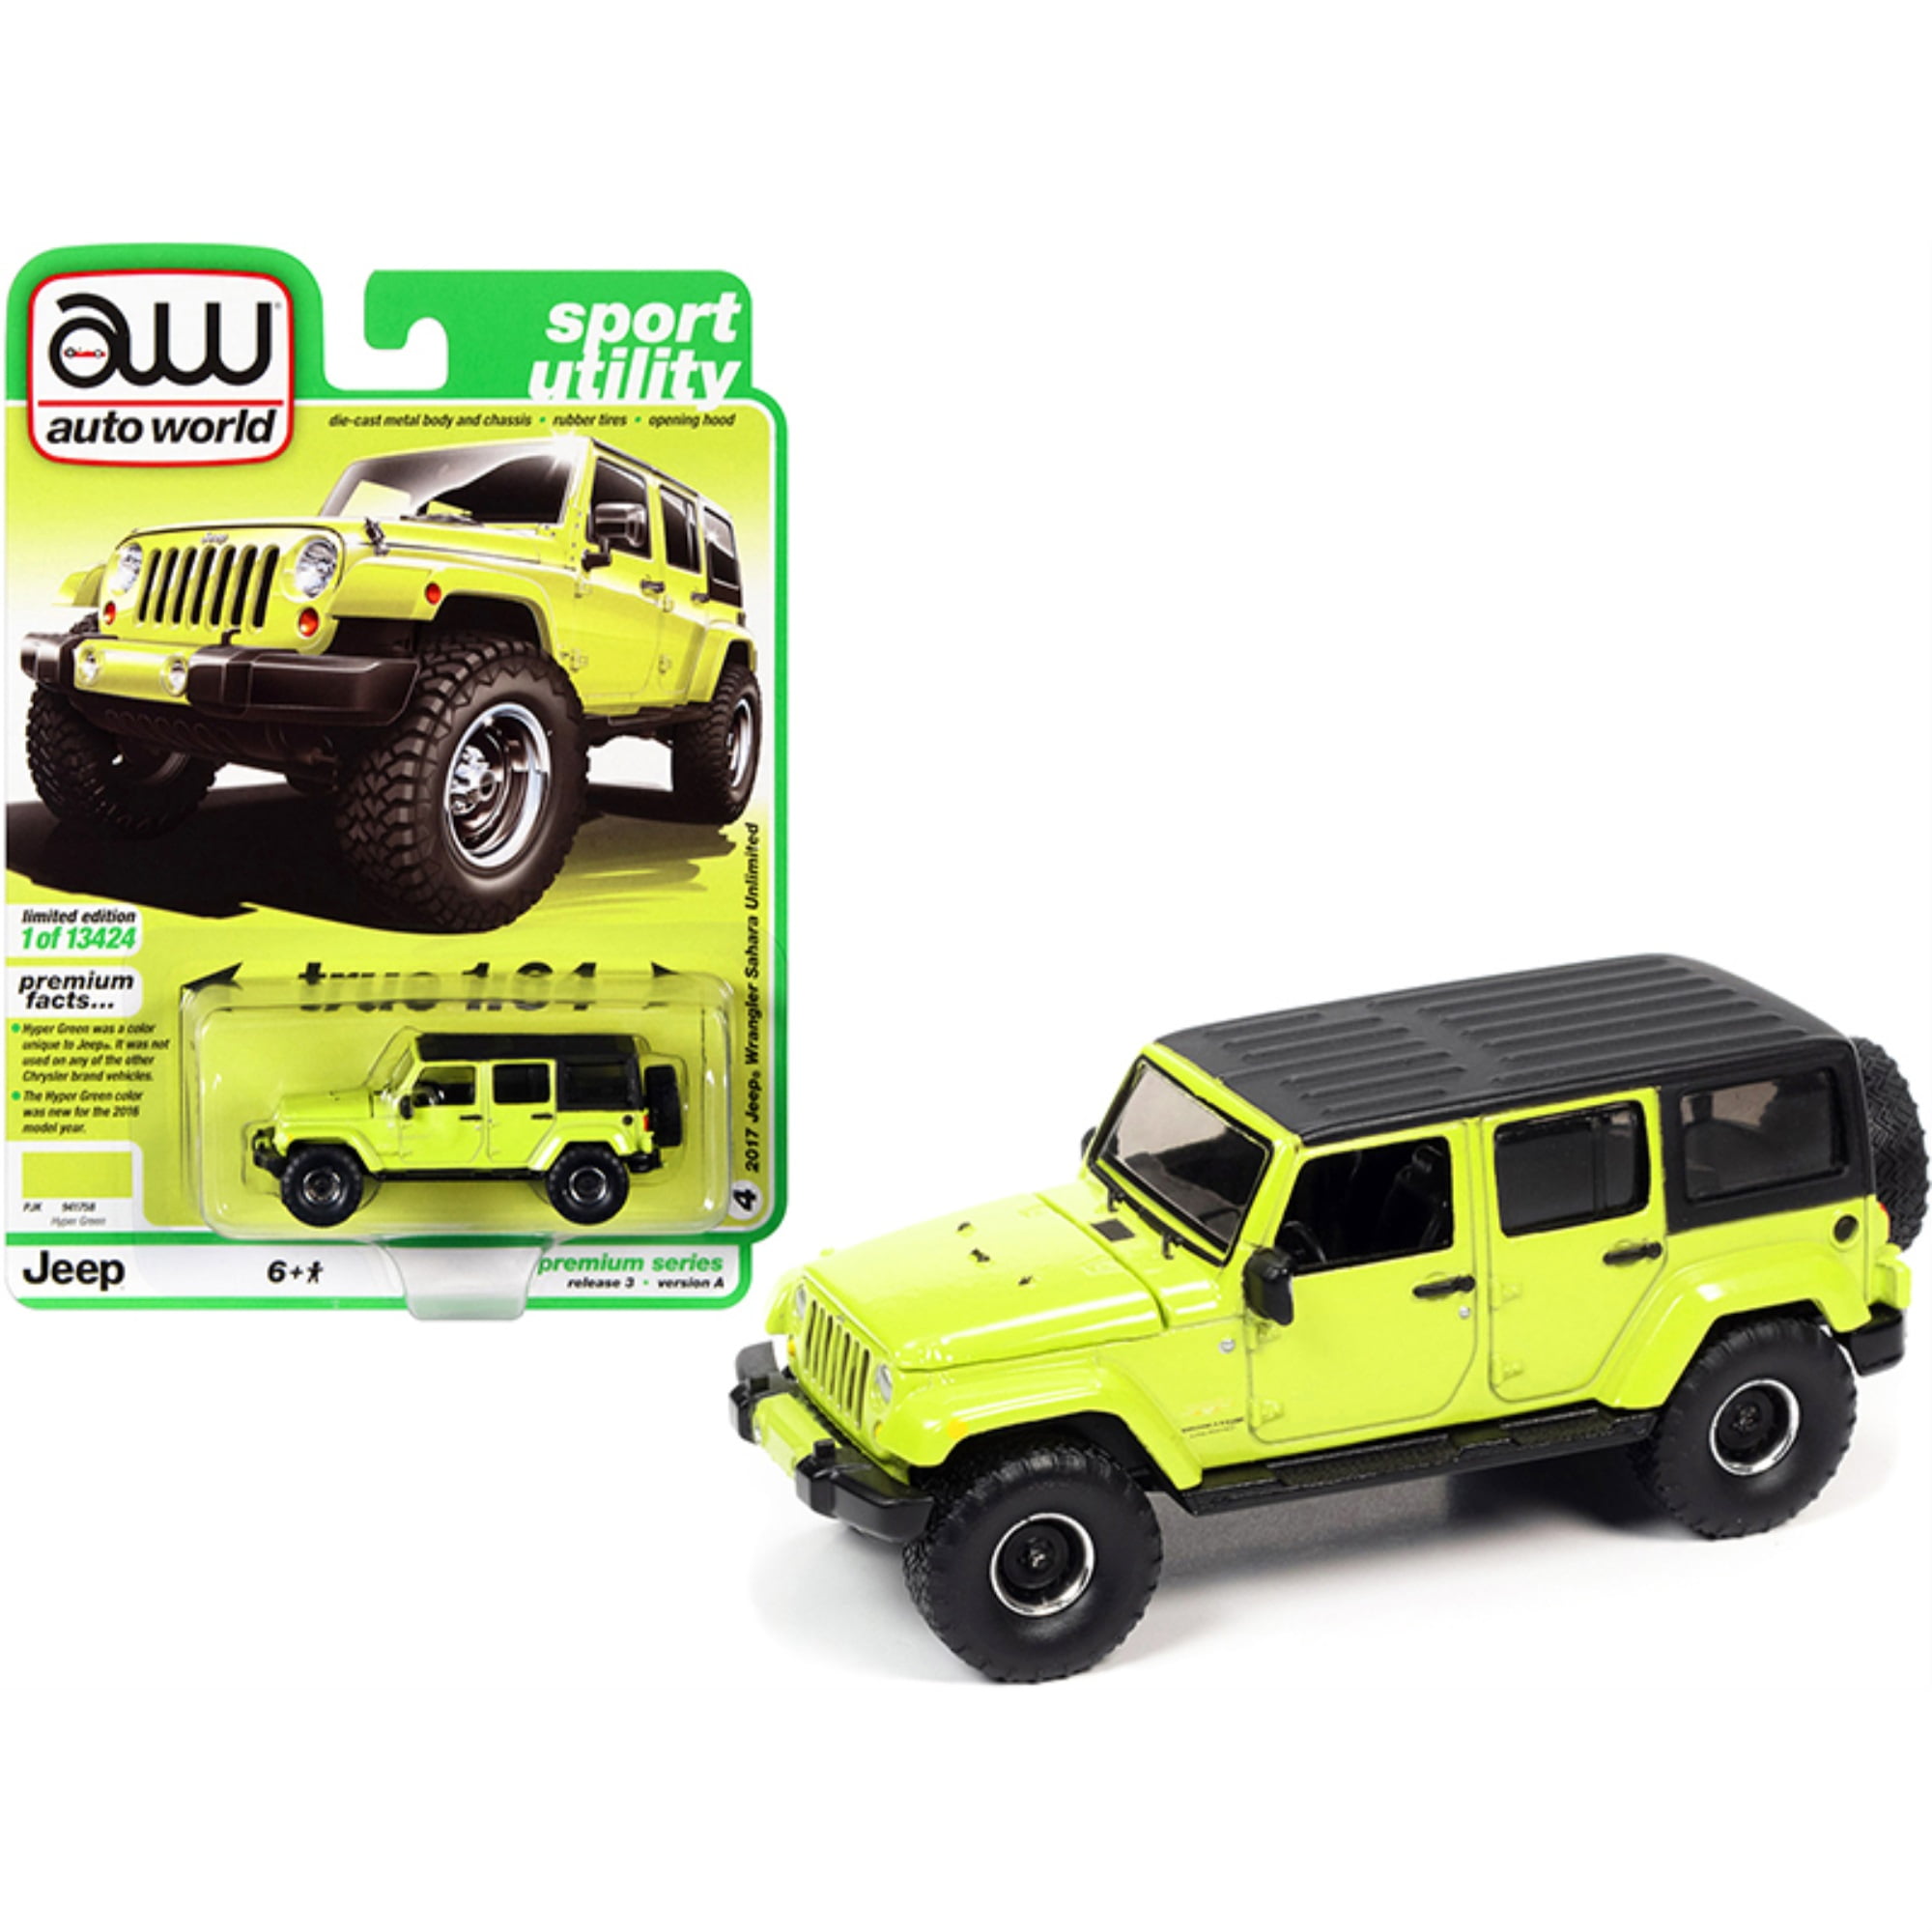 2017 Jeep Wrangler Sahara Unlimited with Off-Road Wheels Hyper Green with  Matt Black Top 